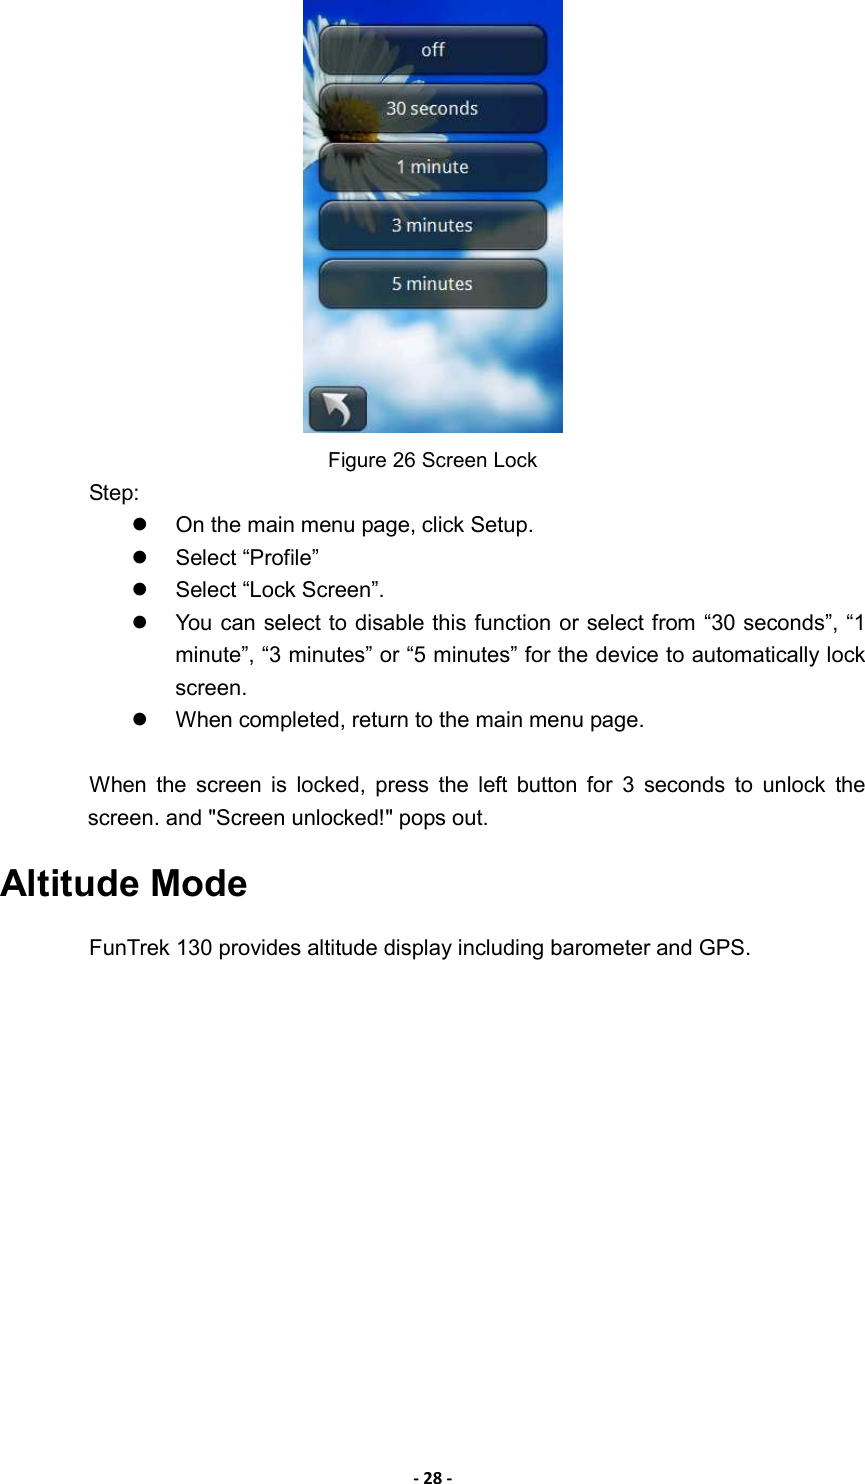 - 28 -  Figure 26 Screen Lock Step:   On the main menu page, click Setup.   Select “Profile”   Select “Lock Screen”.     You can select to disable this function or select from “30 seconds”, “1 minute”, “3 minutes” or “5 minutes” for the device to automatically lock screen.     When completed, return to the main menu page.  When  the  screen  is  locked,  press  the  left  button  for  3  seconds  to  unlock  the screen. and &quot;Screen unlocked!&quot; pops out. Altitude Mode FunTrek 130 provides altitude display including barometer and GPS.   